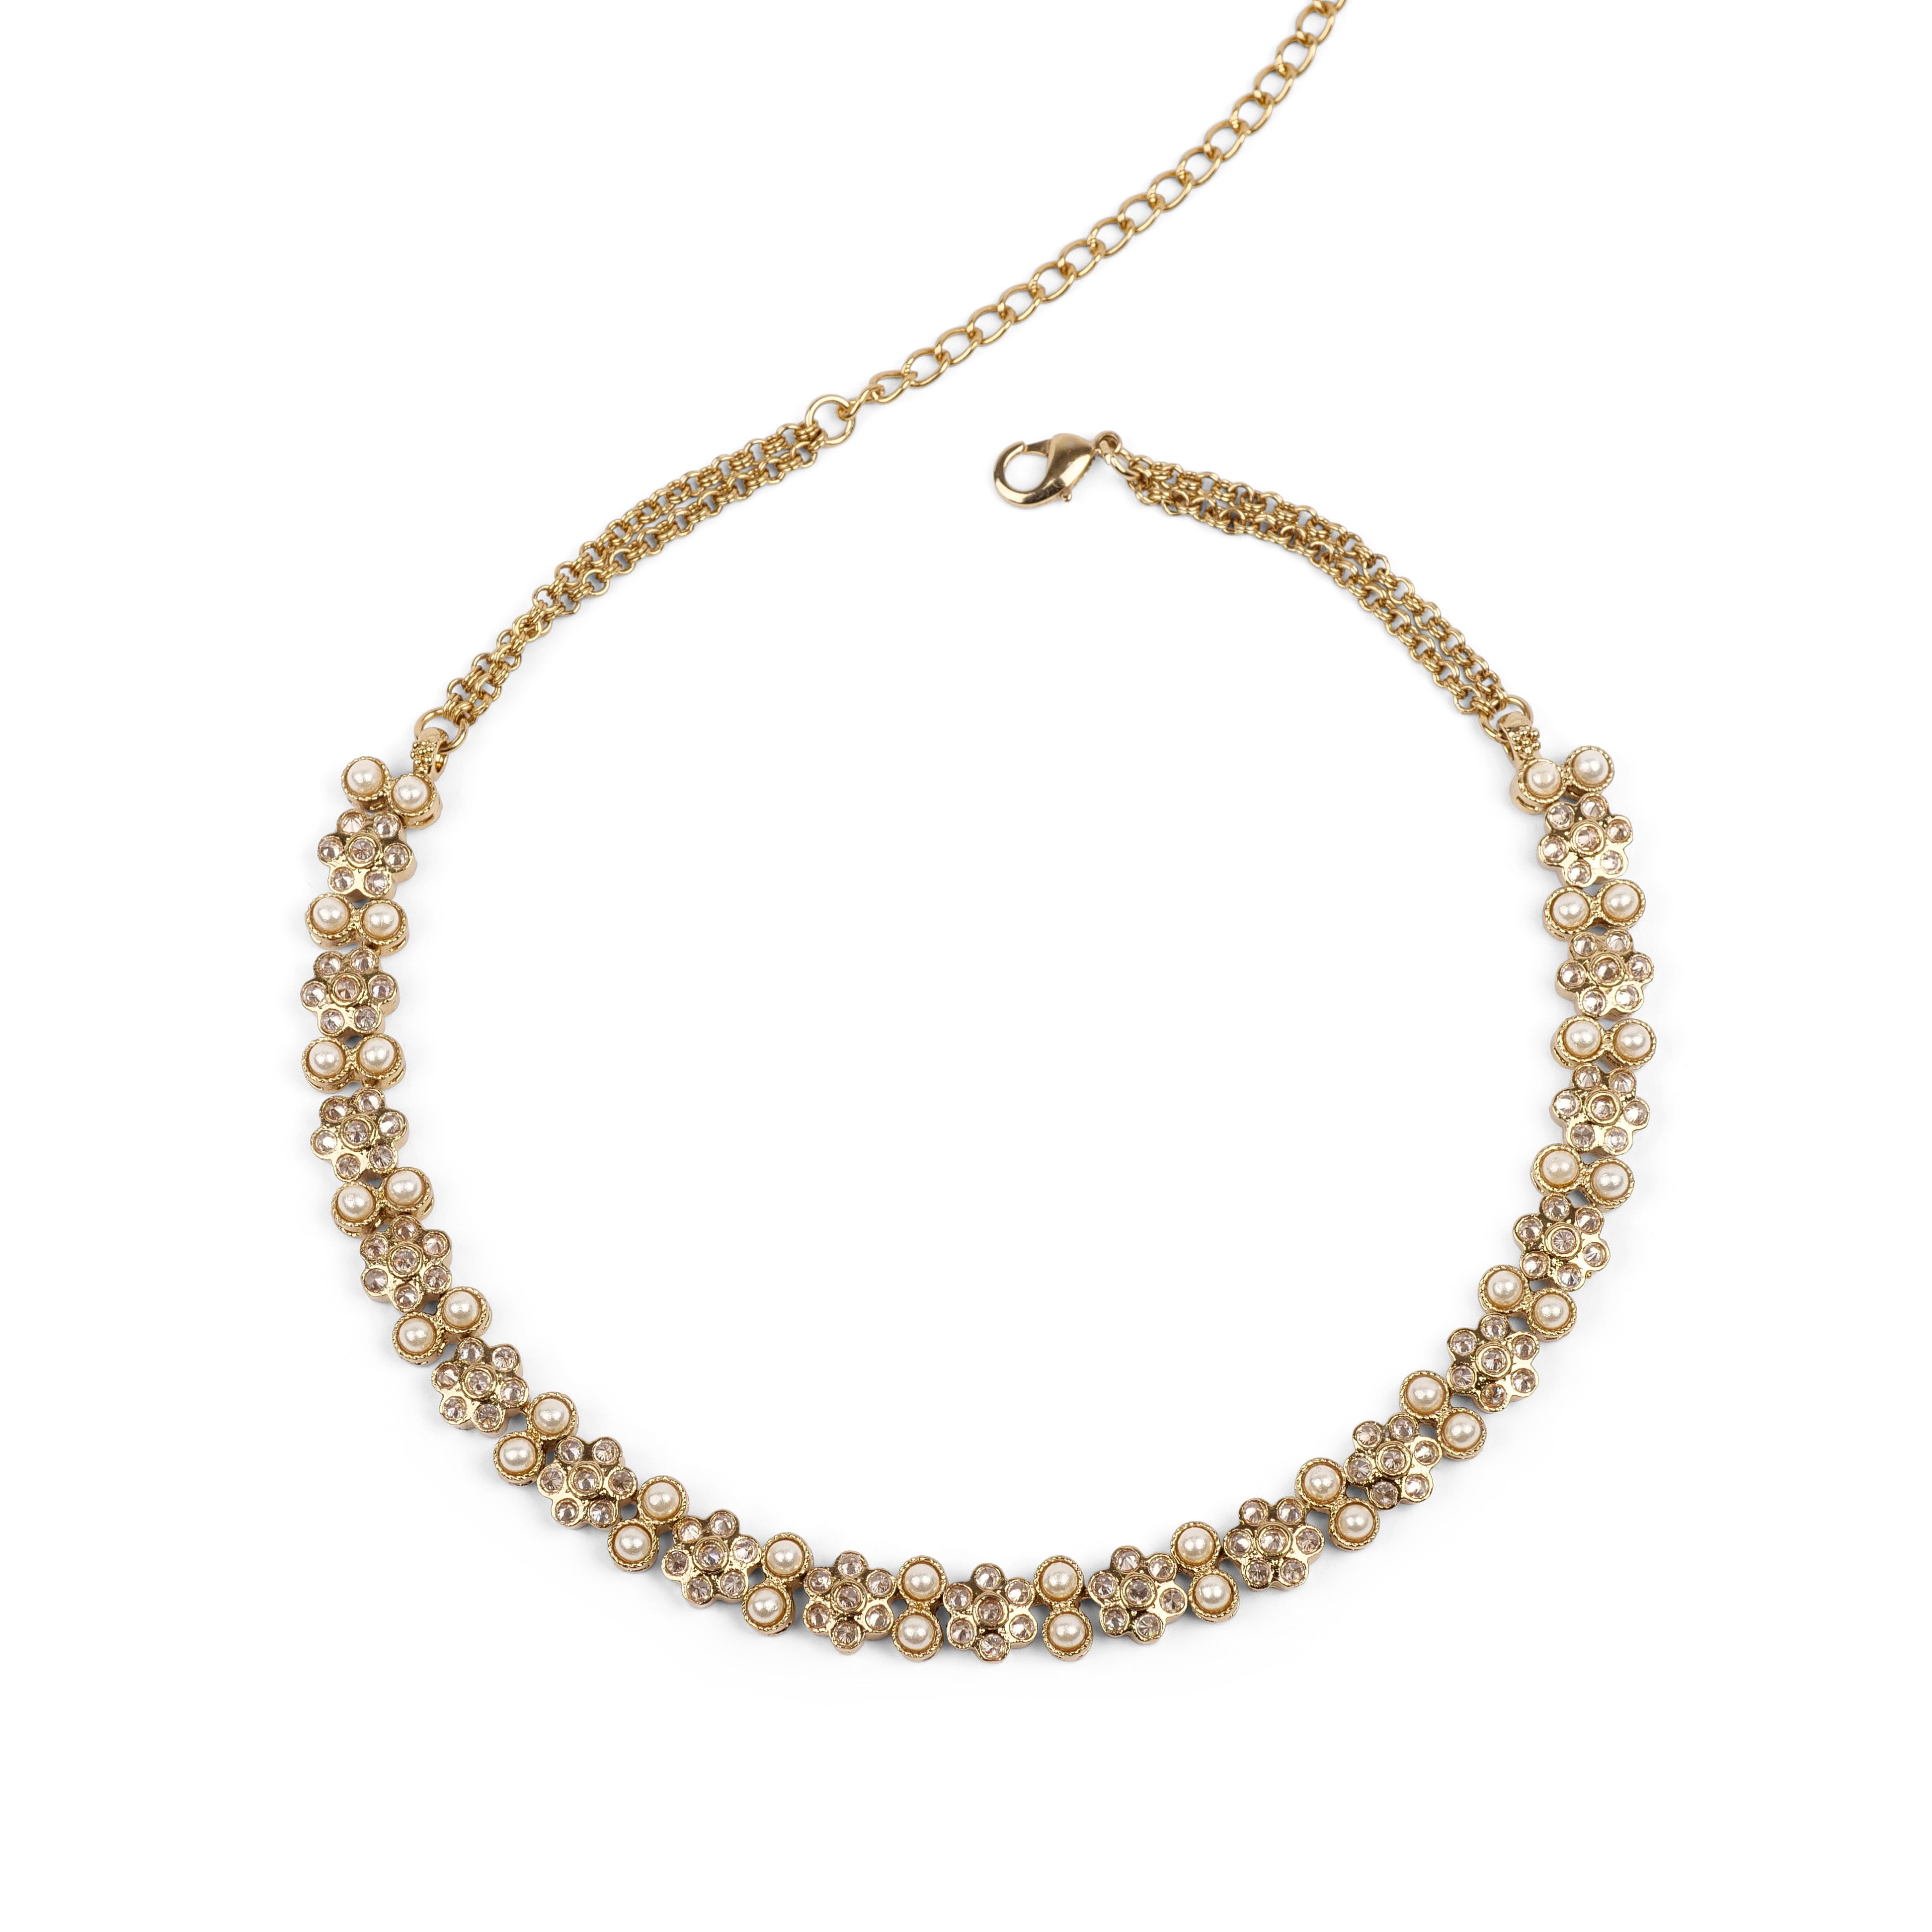 Forever Floral Necklace in Pearl and Antique Gold